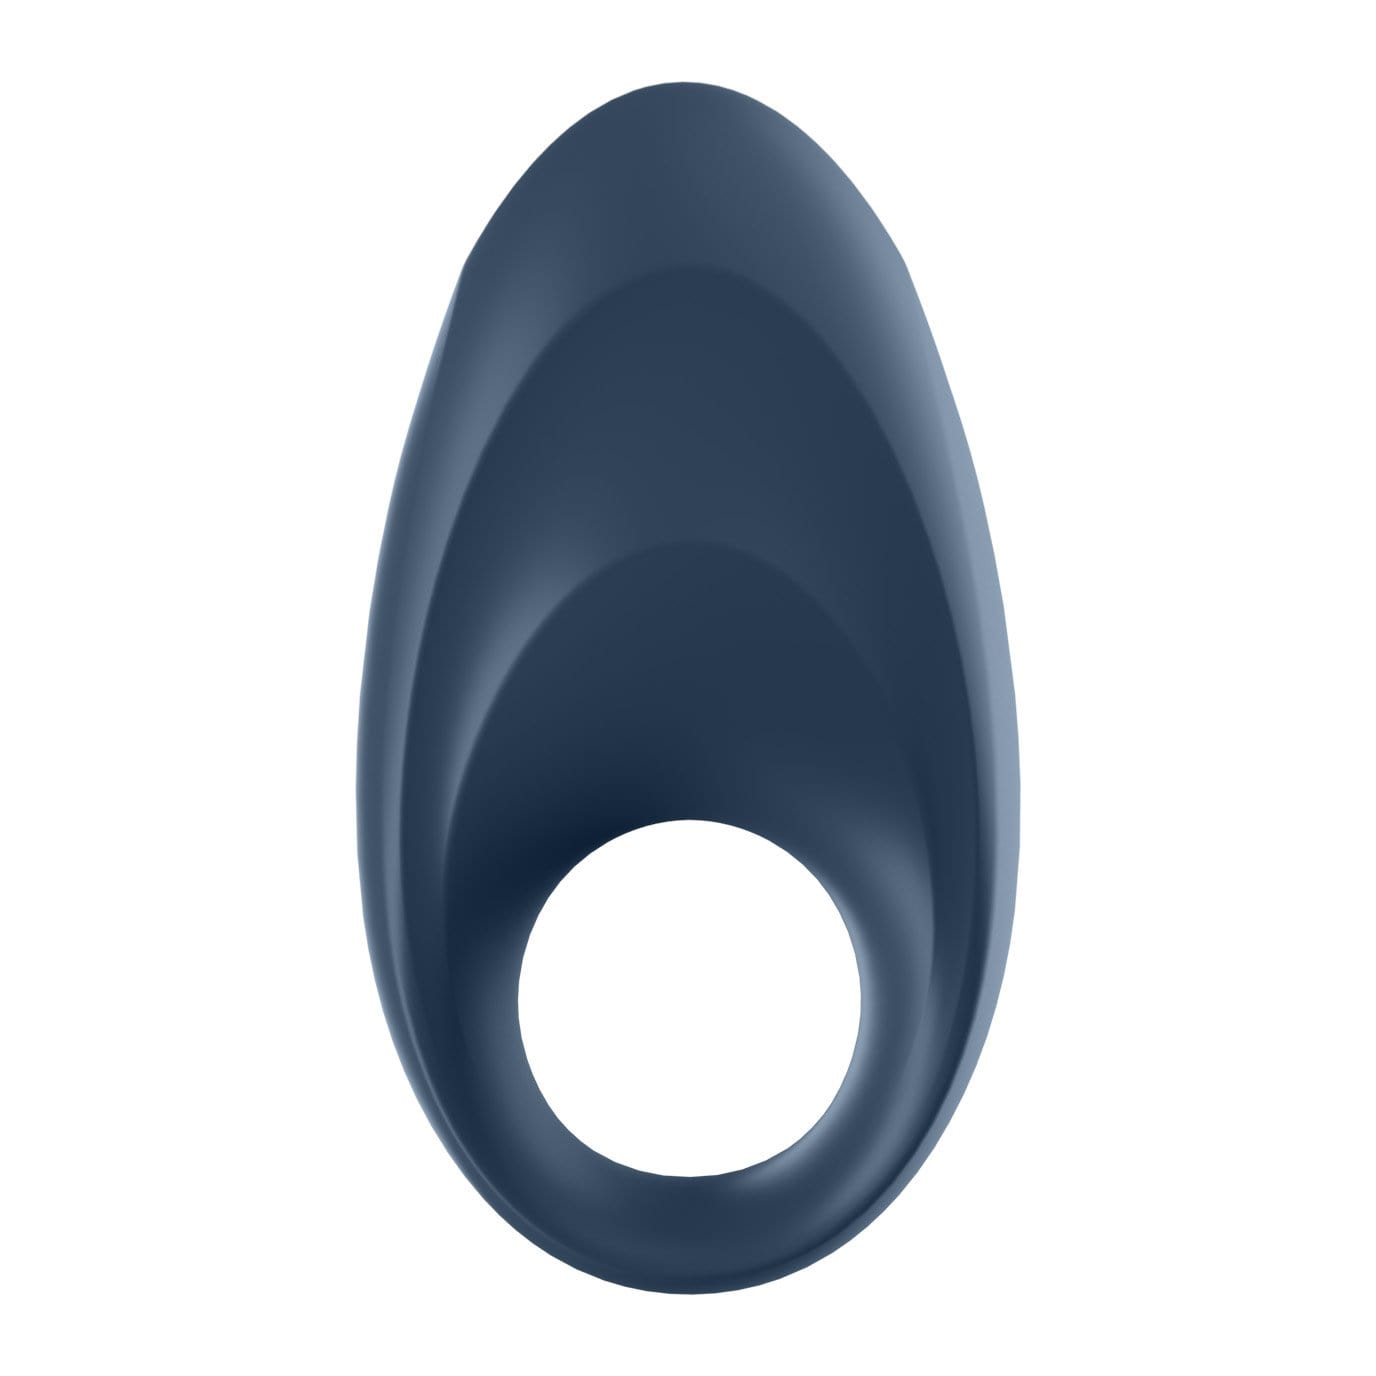 Satisfyer - Mighty One Ring App-Controlled Bluetooth Cock Ring (Blue) Remote Control Cock Ring (Vibration) Rechargeable 289884390 CherryAffairs